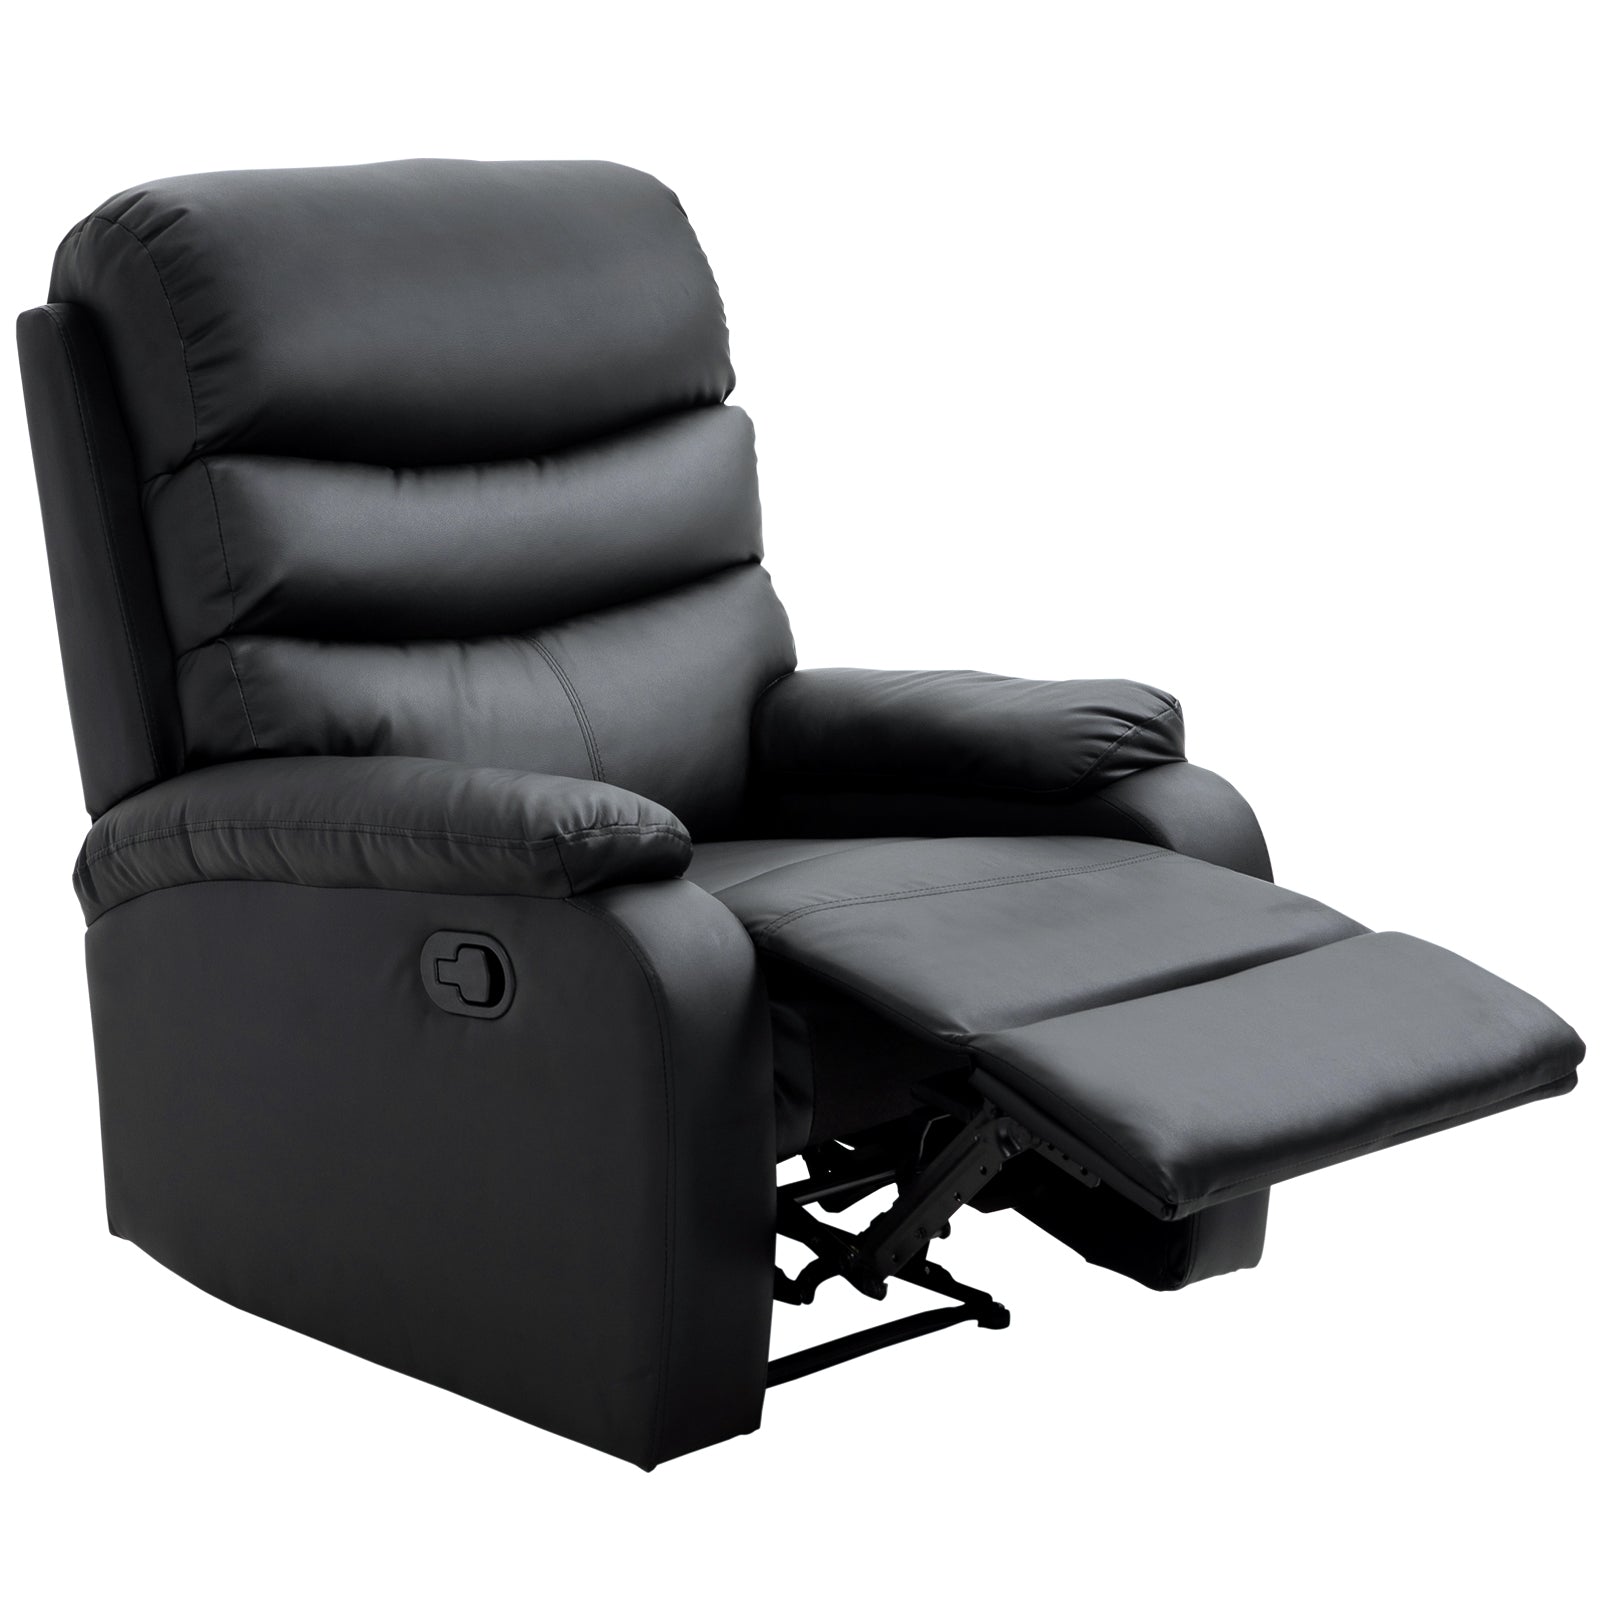 PU Leather Reclining Chair, Manual Recliner Chair with Padded Armrests, Retractable Footrest and Wood Frame, Black-0